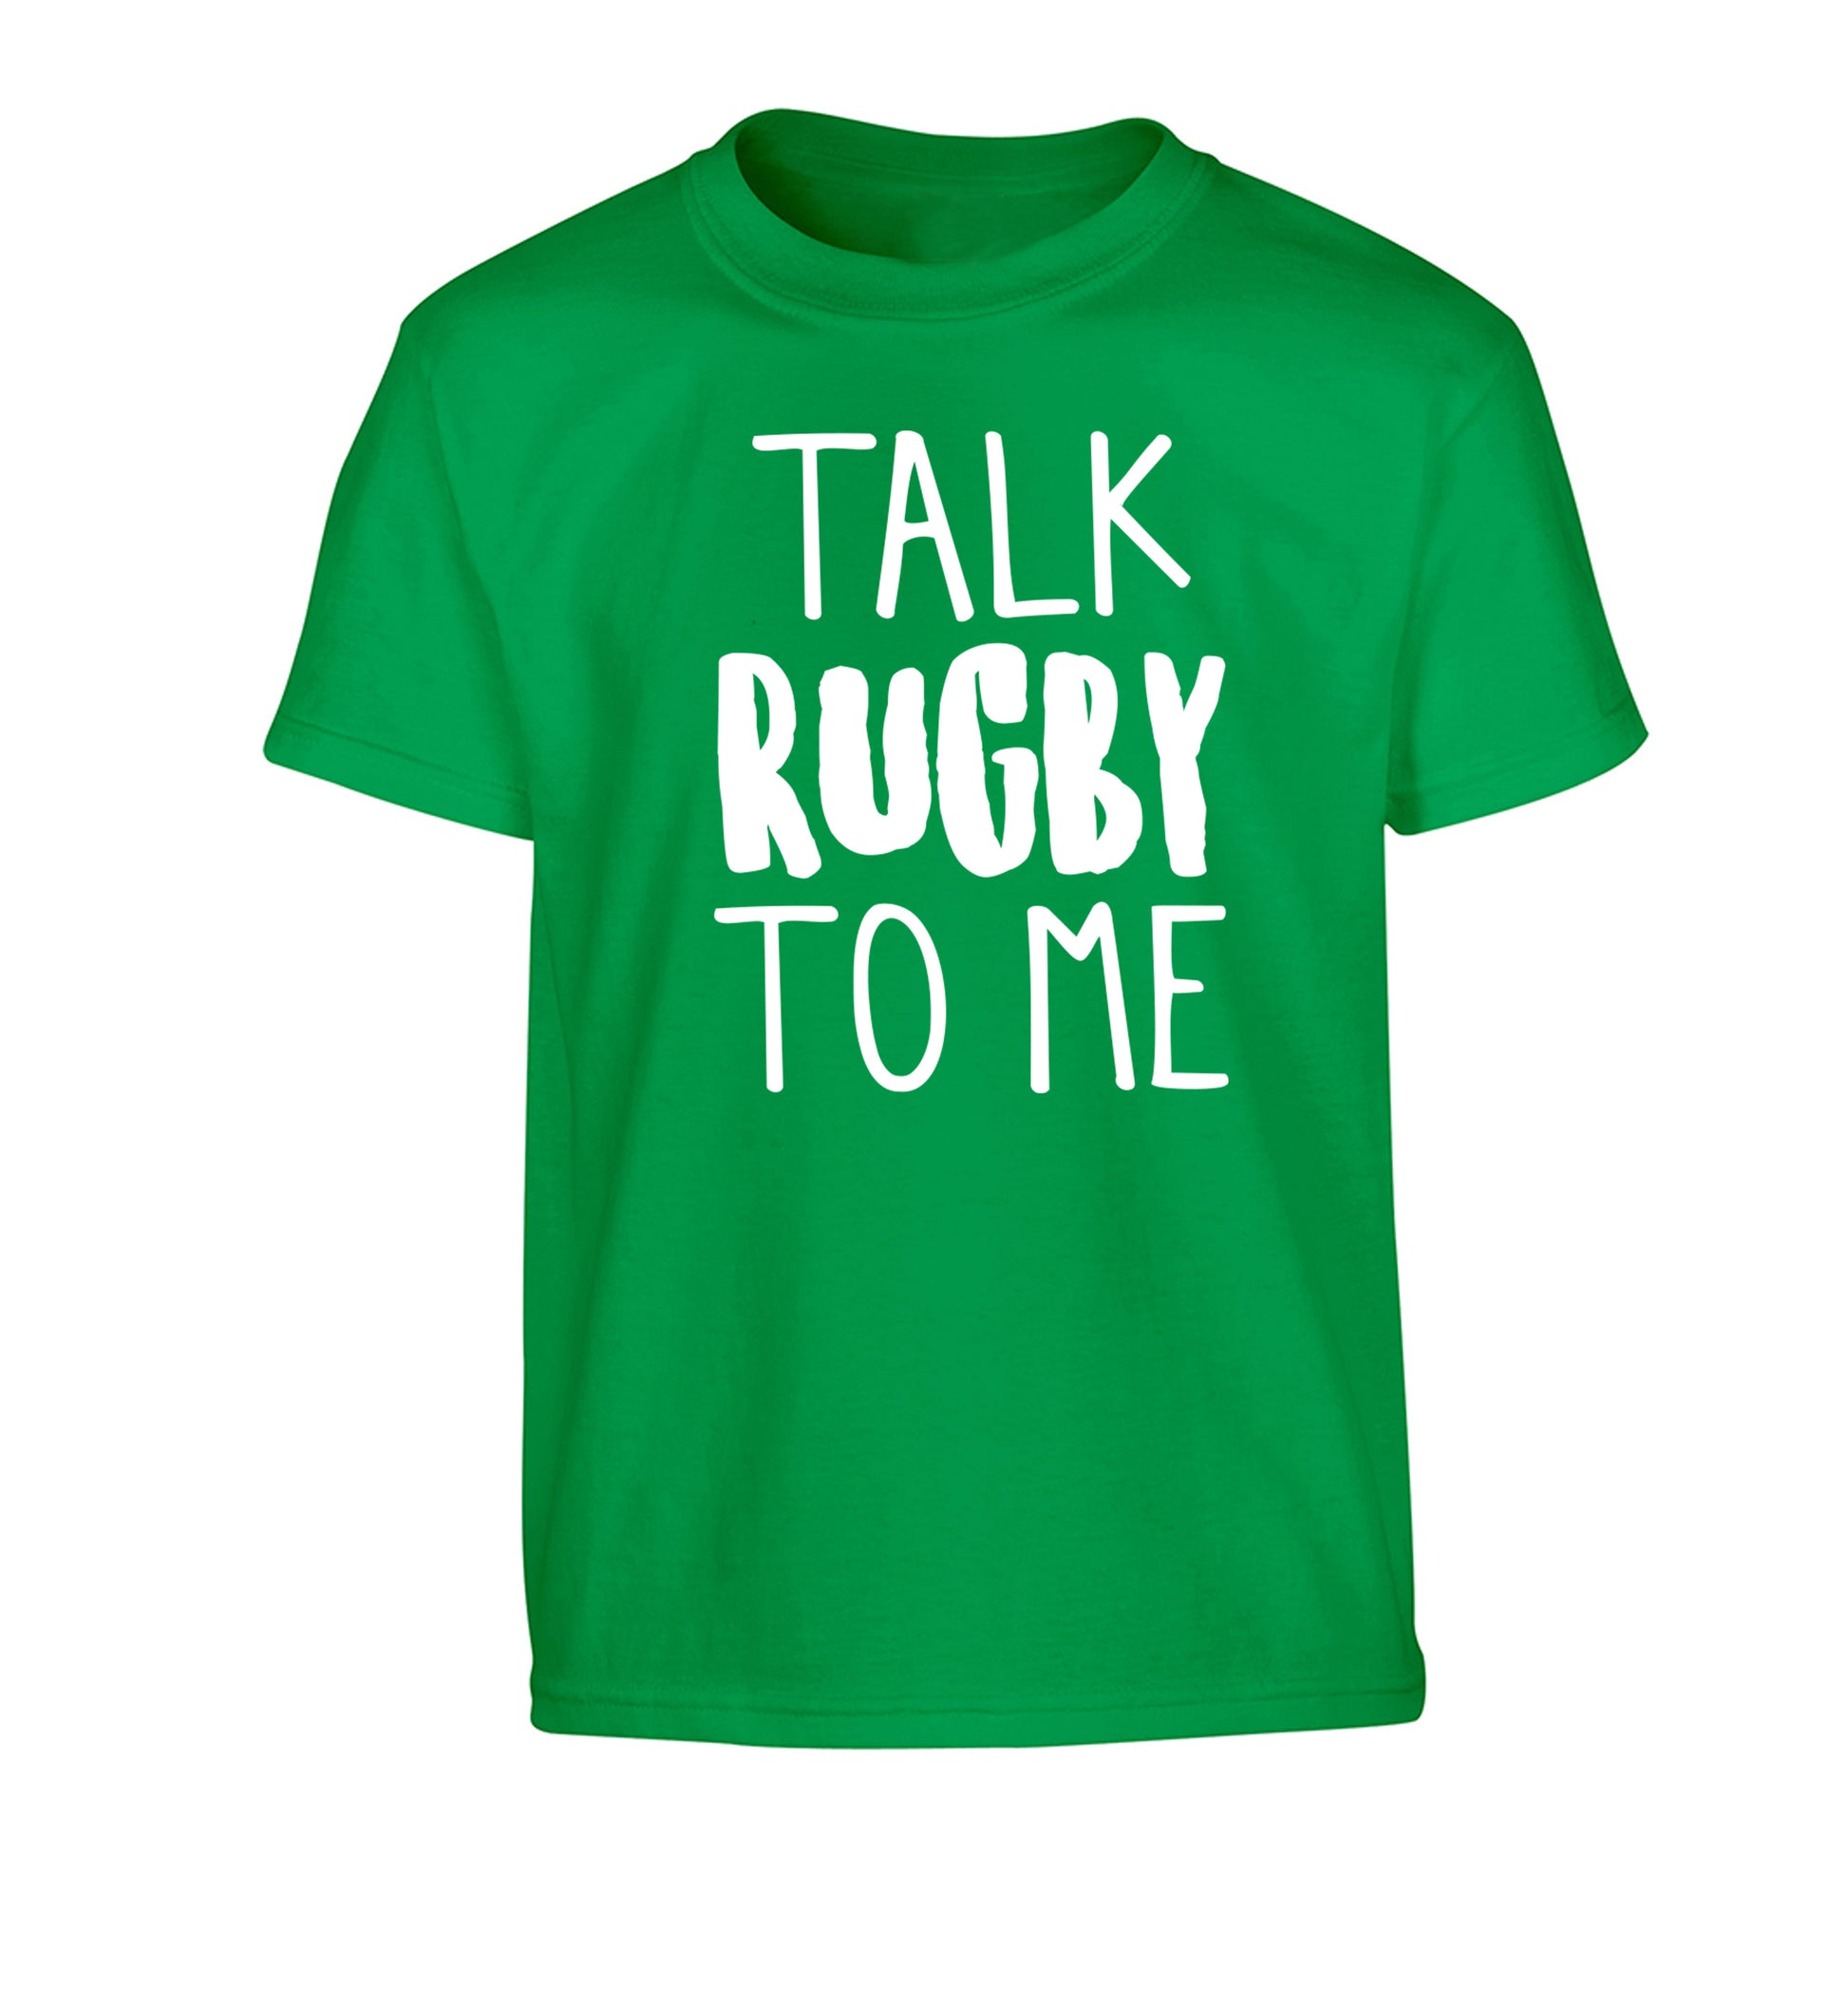 Talk rugby to me Children's green Tshirt 12-13 Years